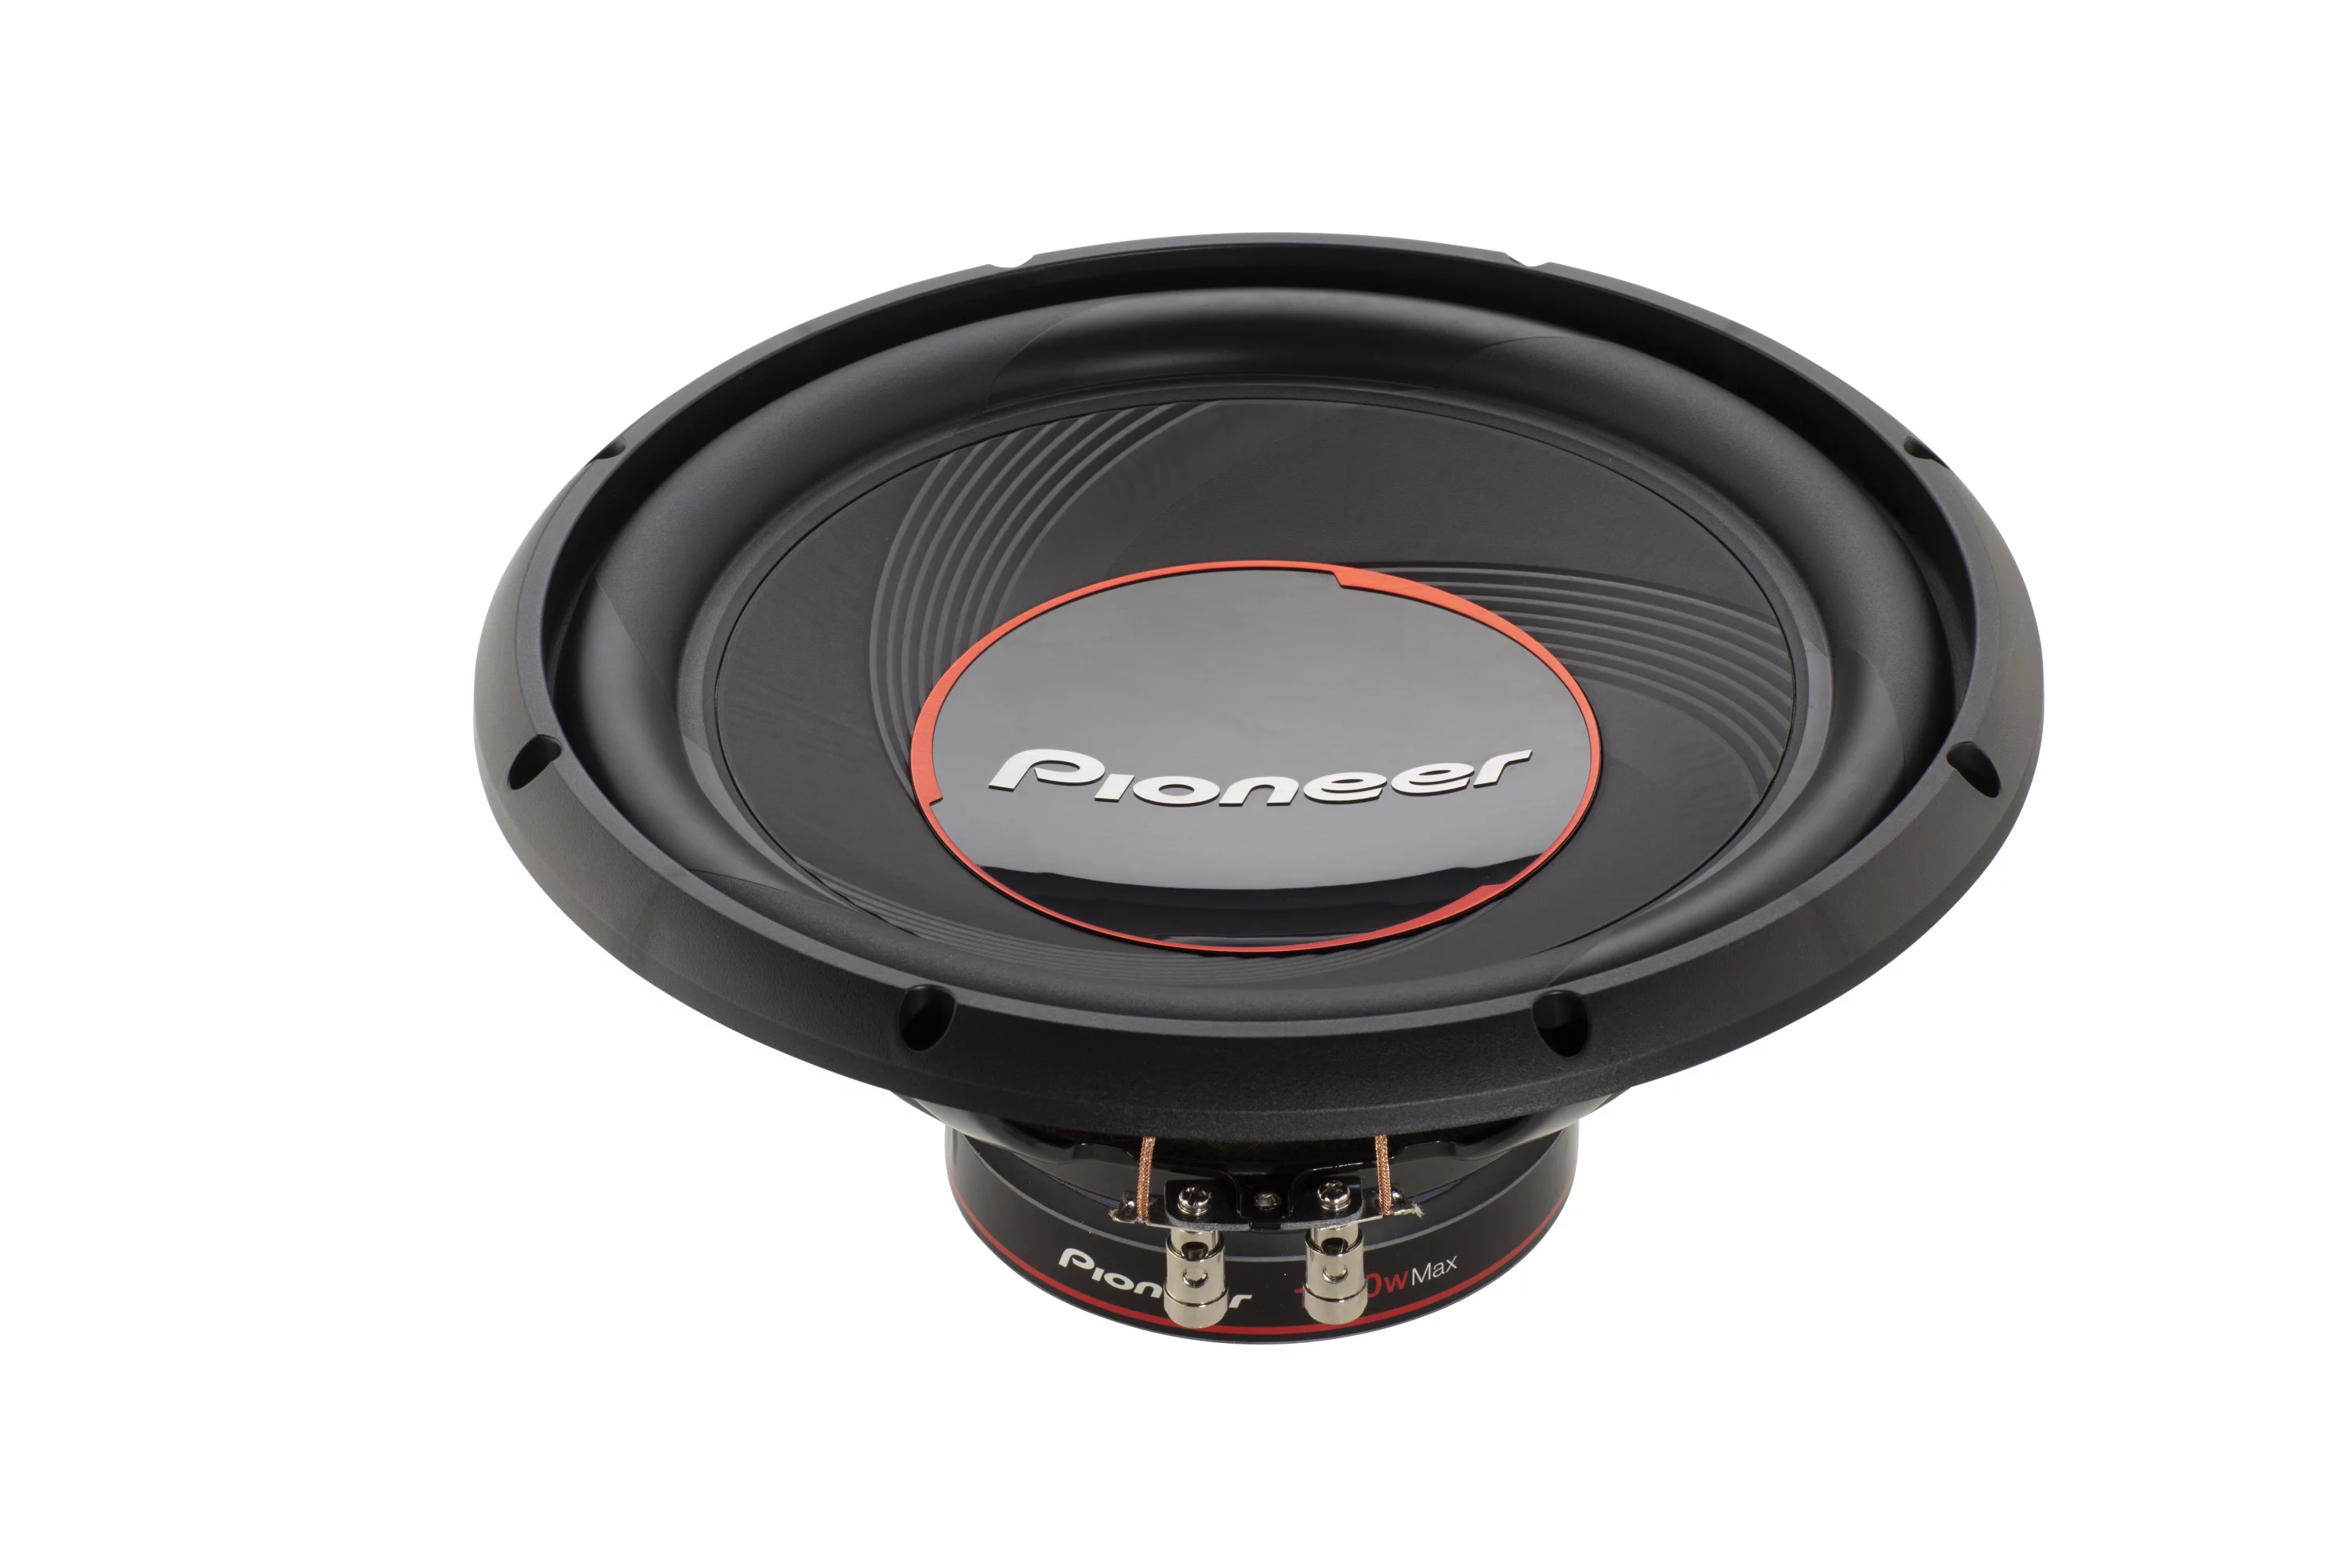 Pioneer TS-1200M 12" Car Audio Subwoofer, 1400 W Max Power, Single 4 Ohm Voice Coil (New)